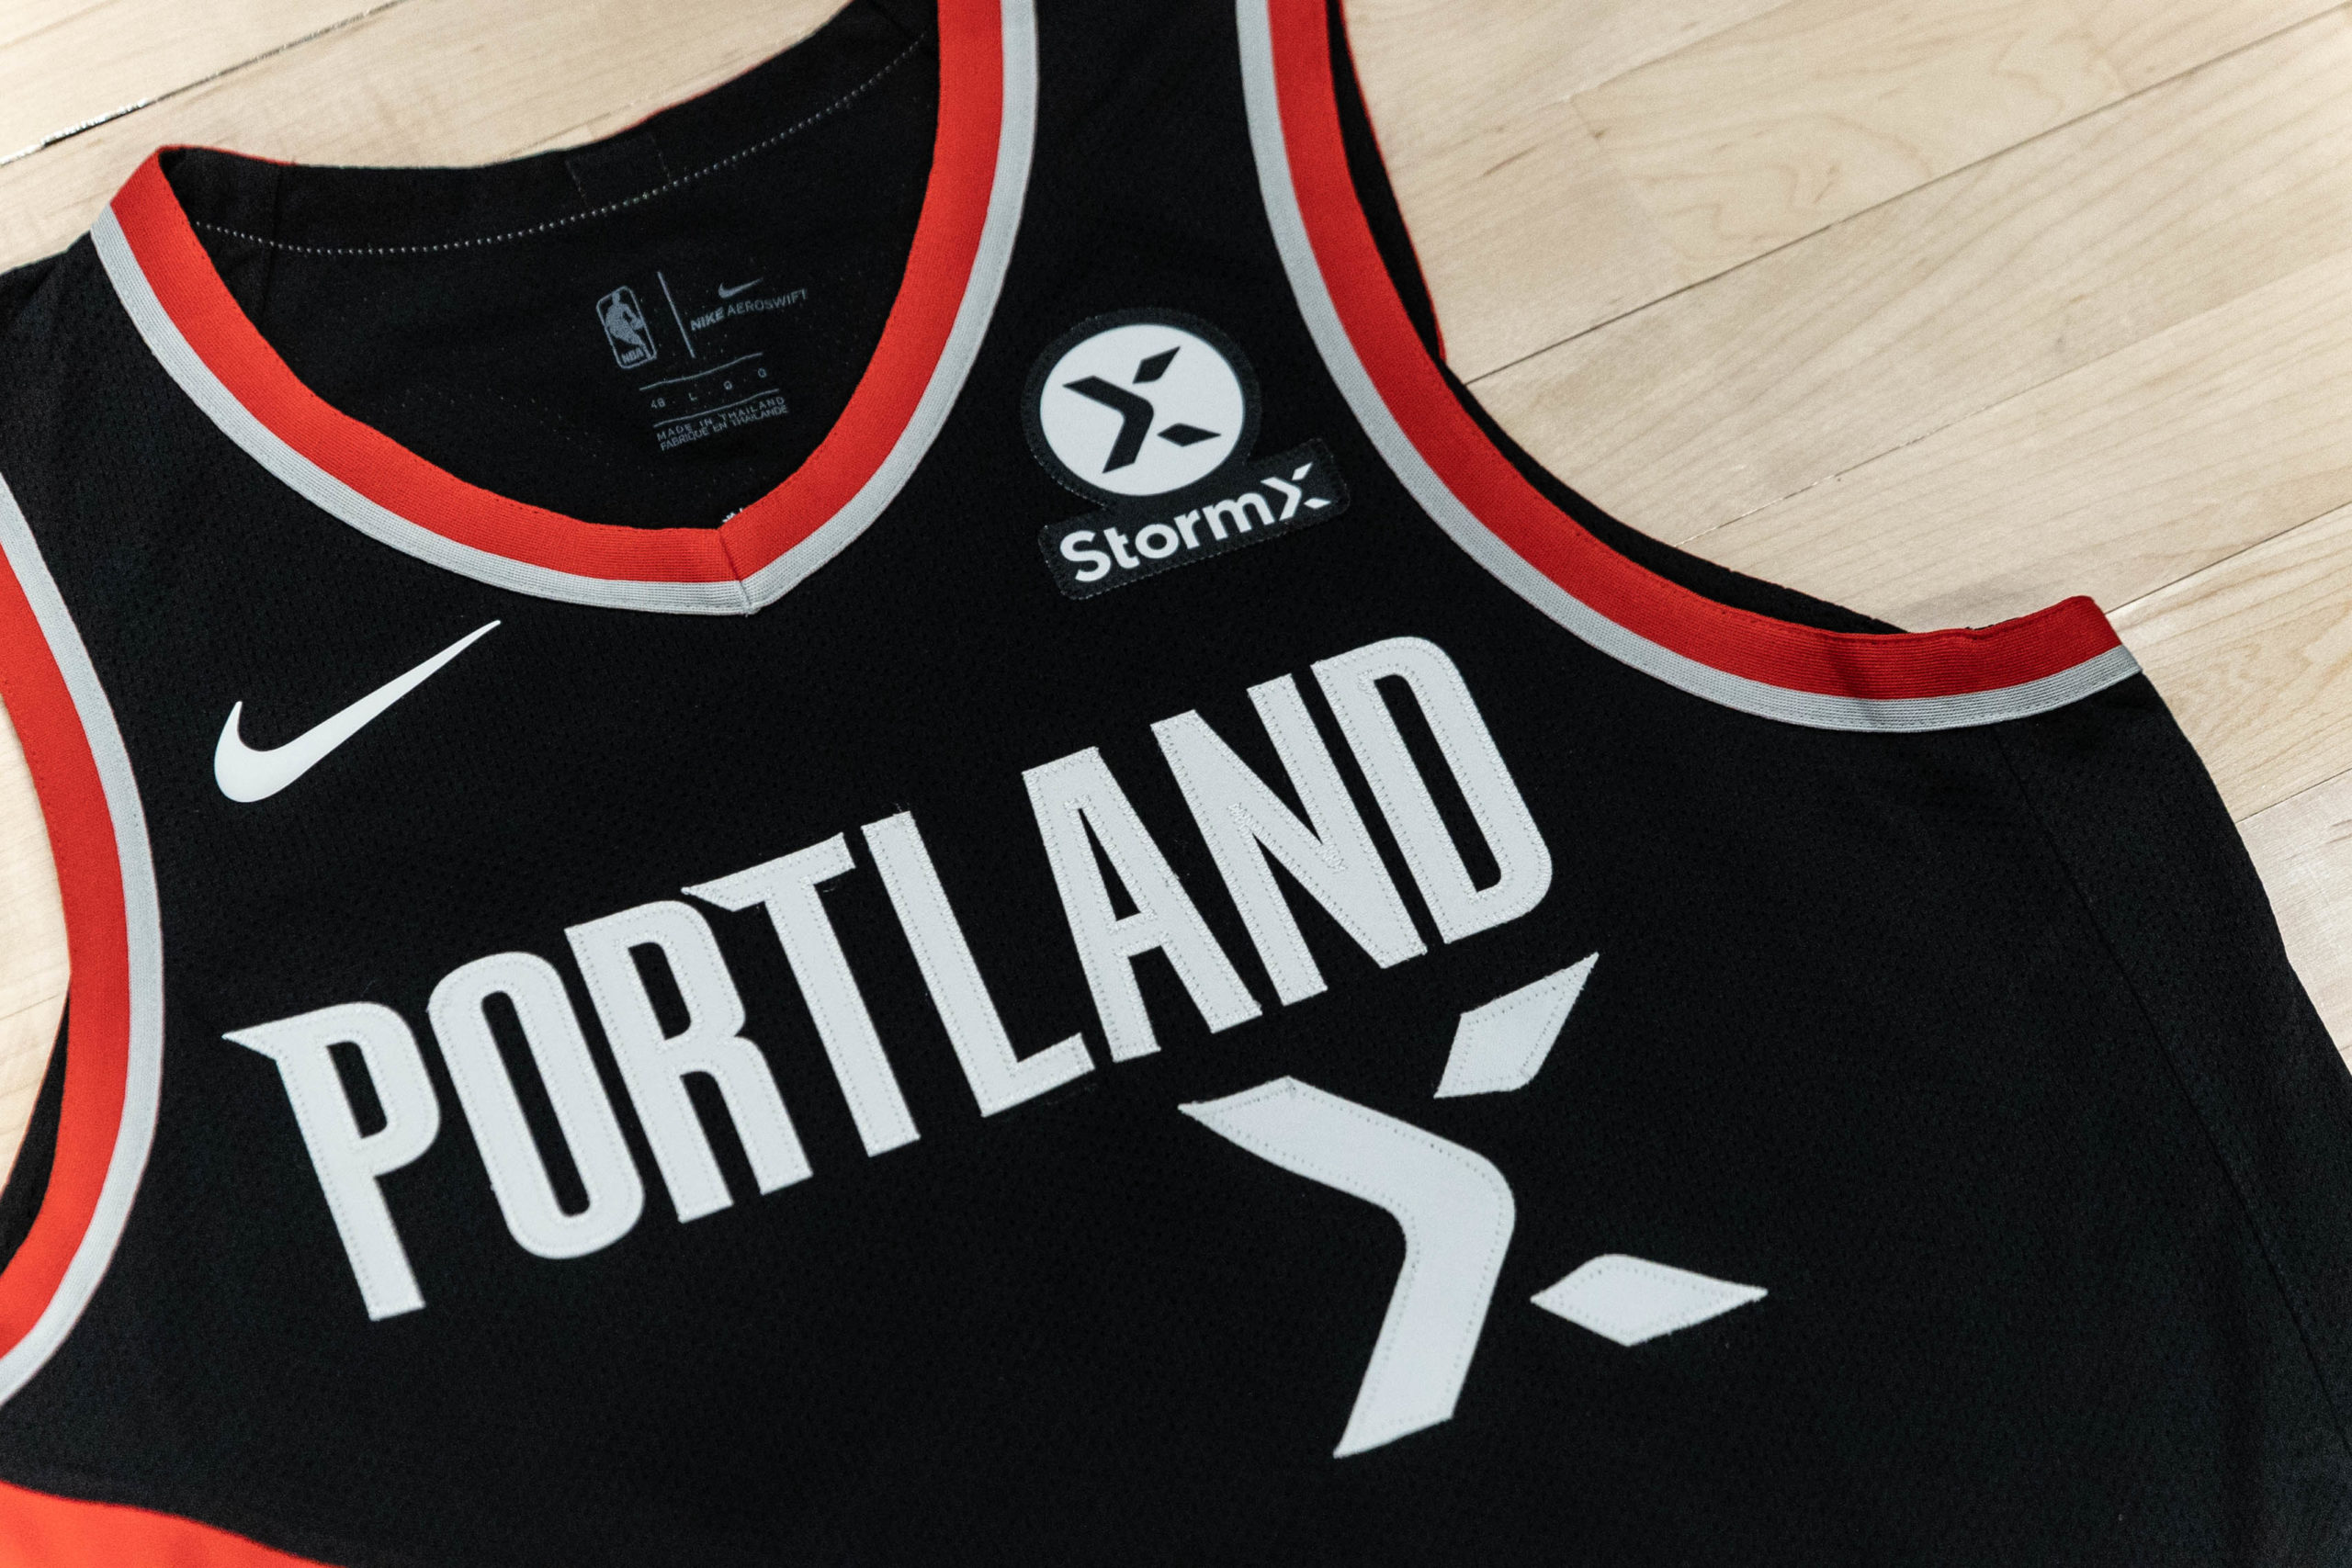 The StormX logo on the official Portland TrailBlazers basketball jersey.